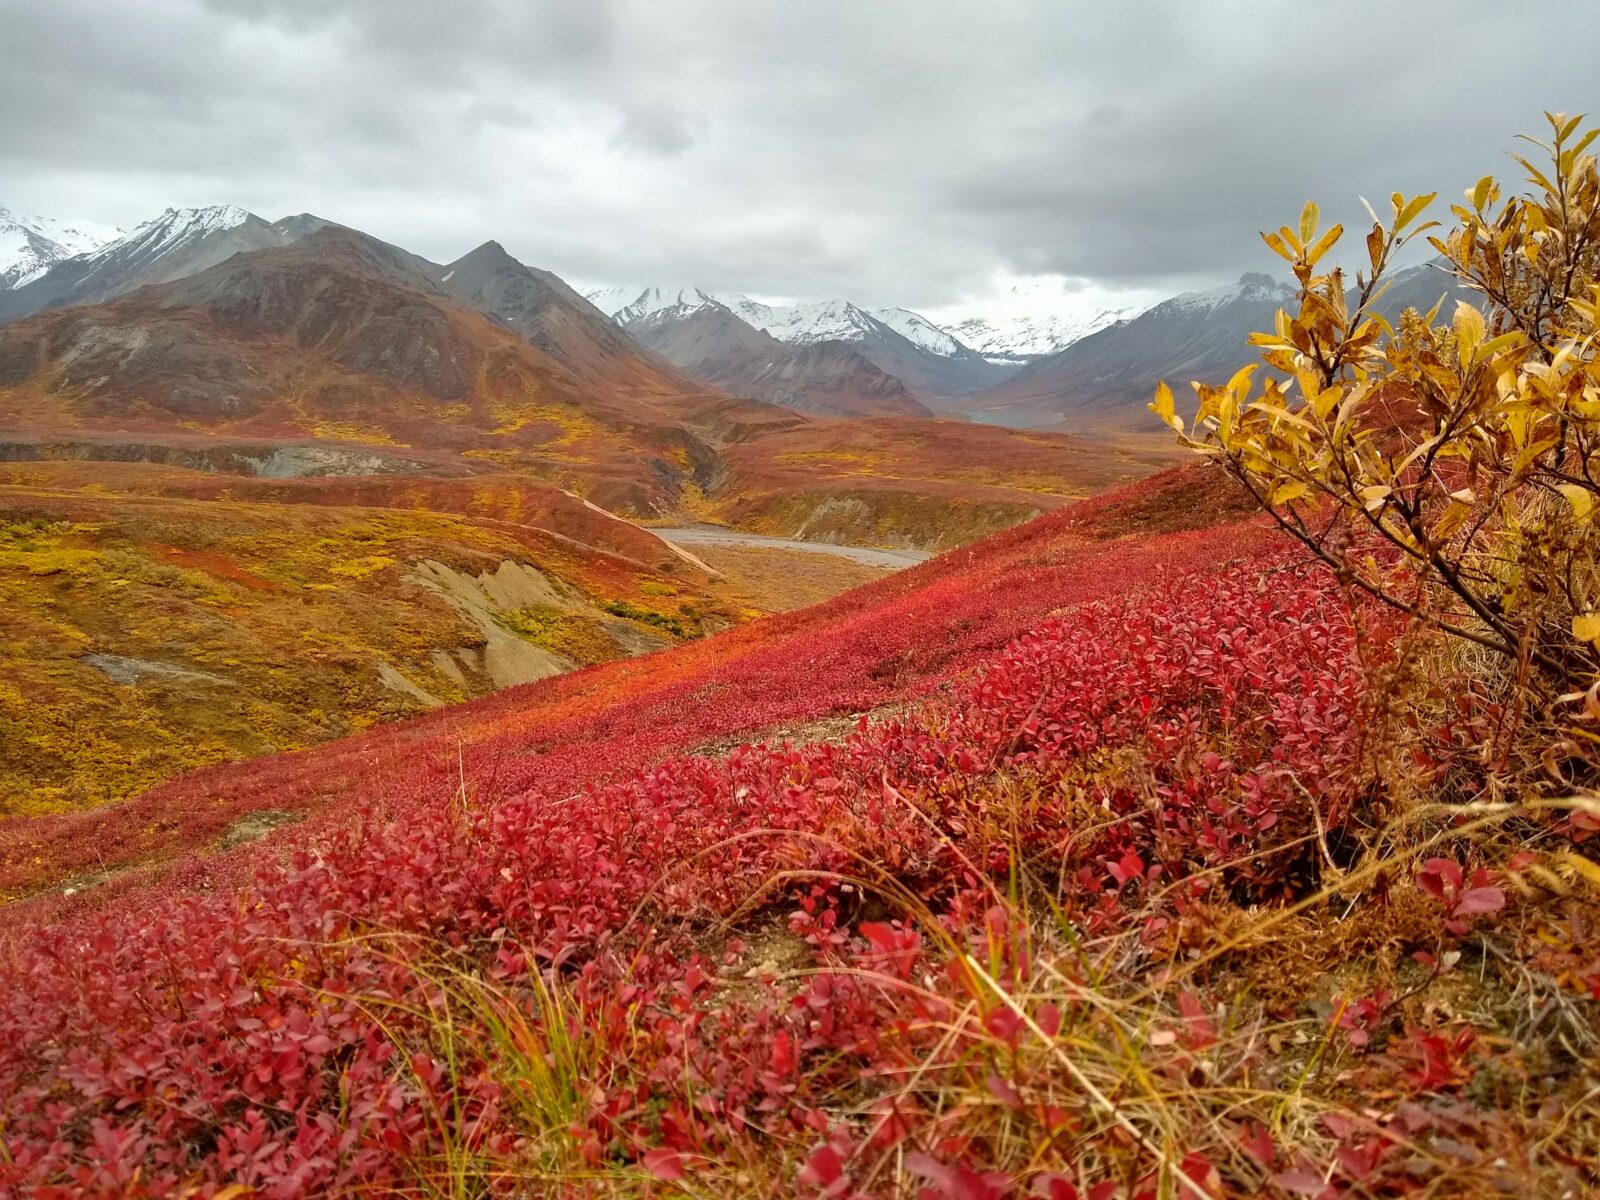 Distant snow capped mountains on a cloudy day, brilliant fall tundra colors in the foreground in Denali National Park.